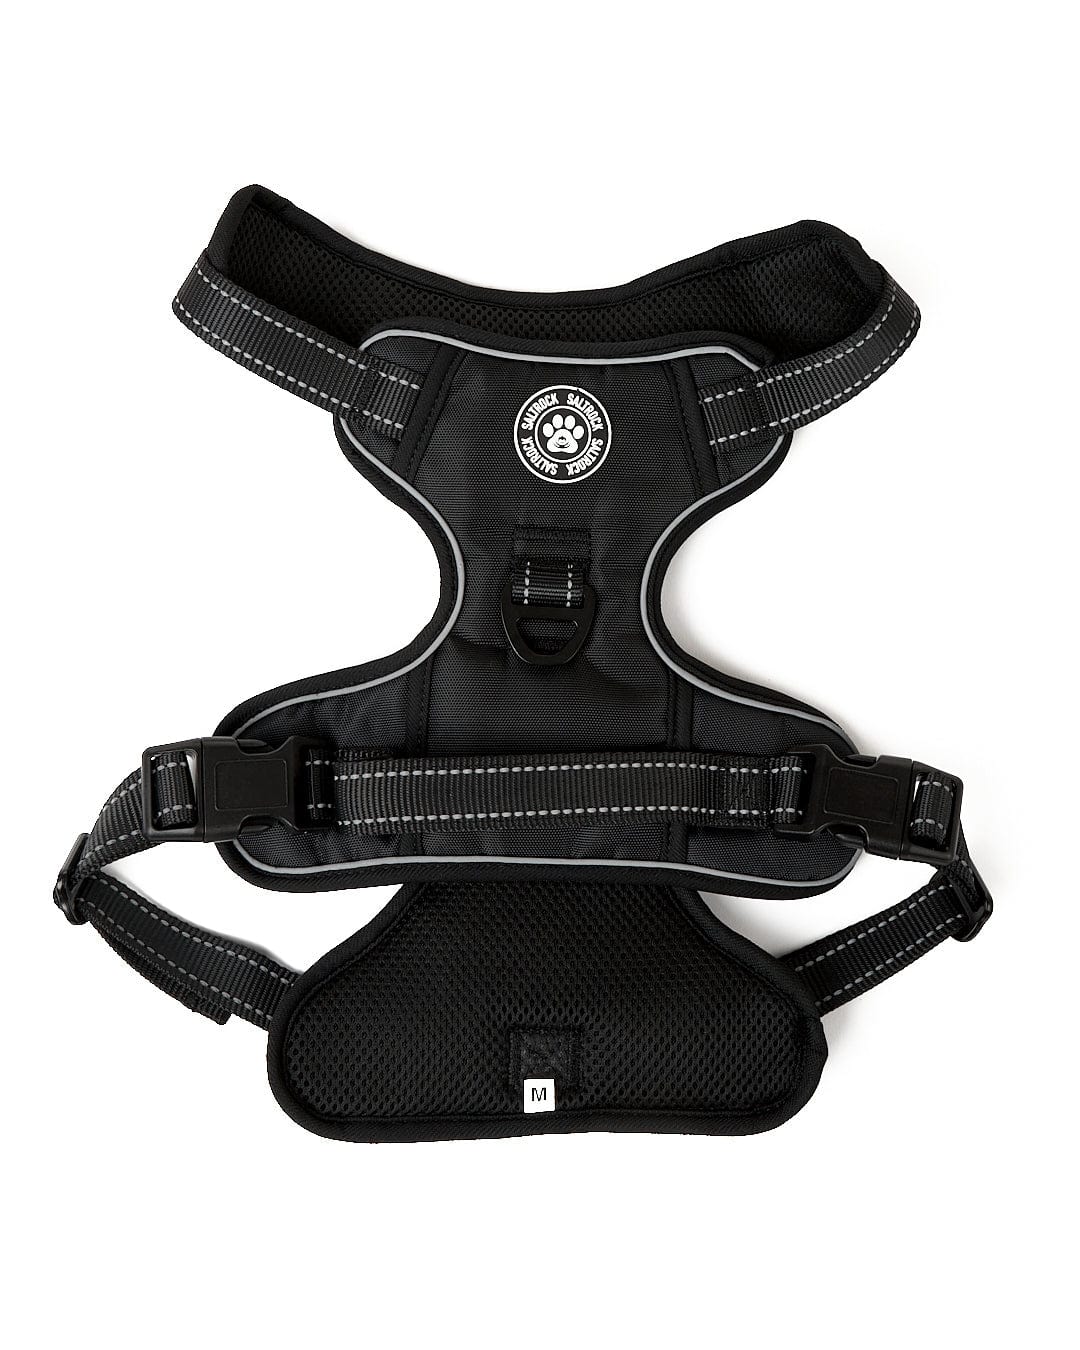 A Saltrock branded black and white pet harness with adjustable straps.